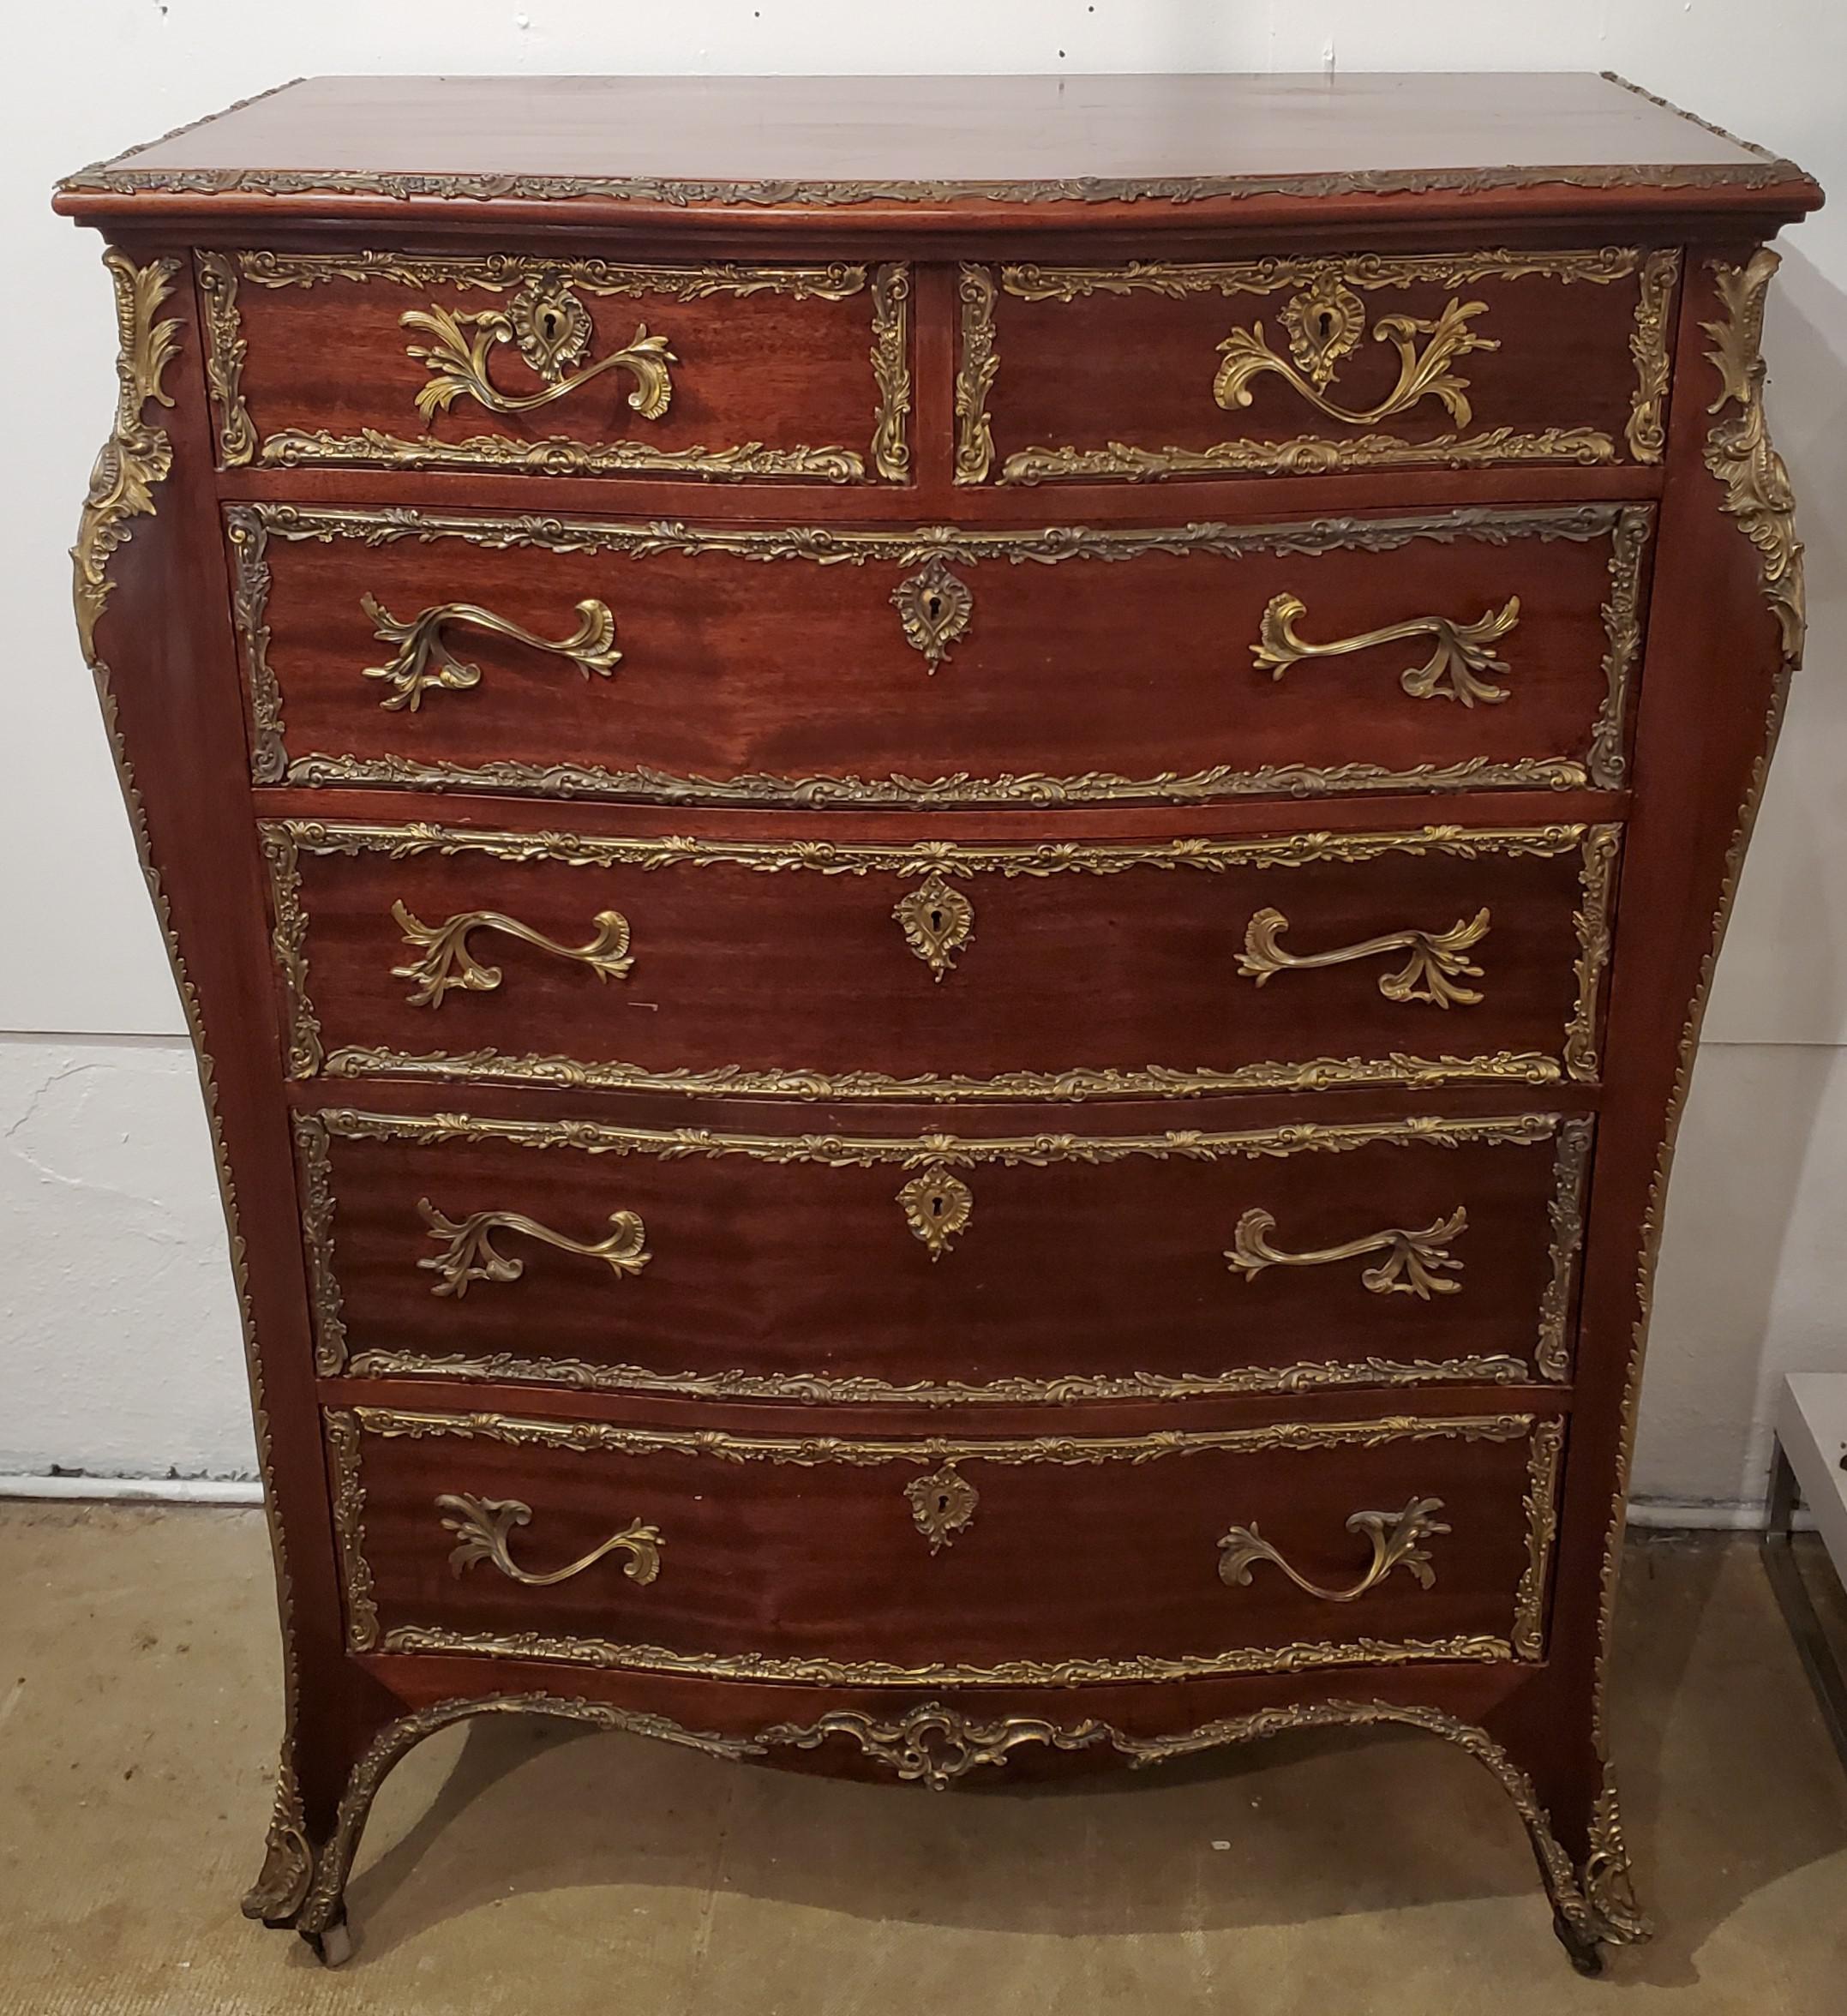 Antique French Bronze ormolu Dresser on Caster with 6 deep drawers. Each drawer has a locking mechanism and comes with keys.